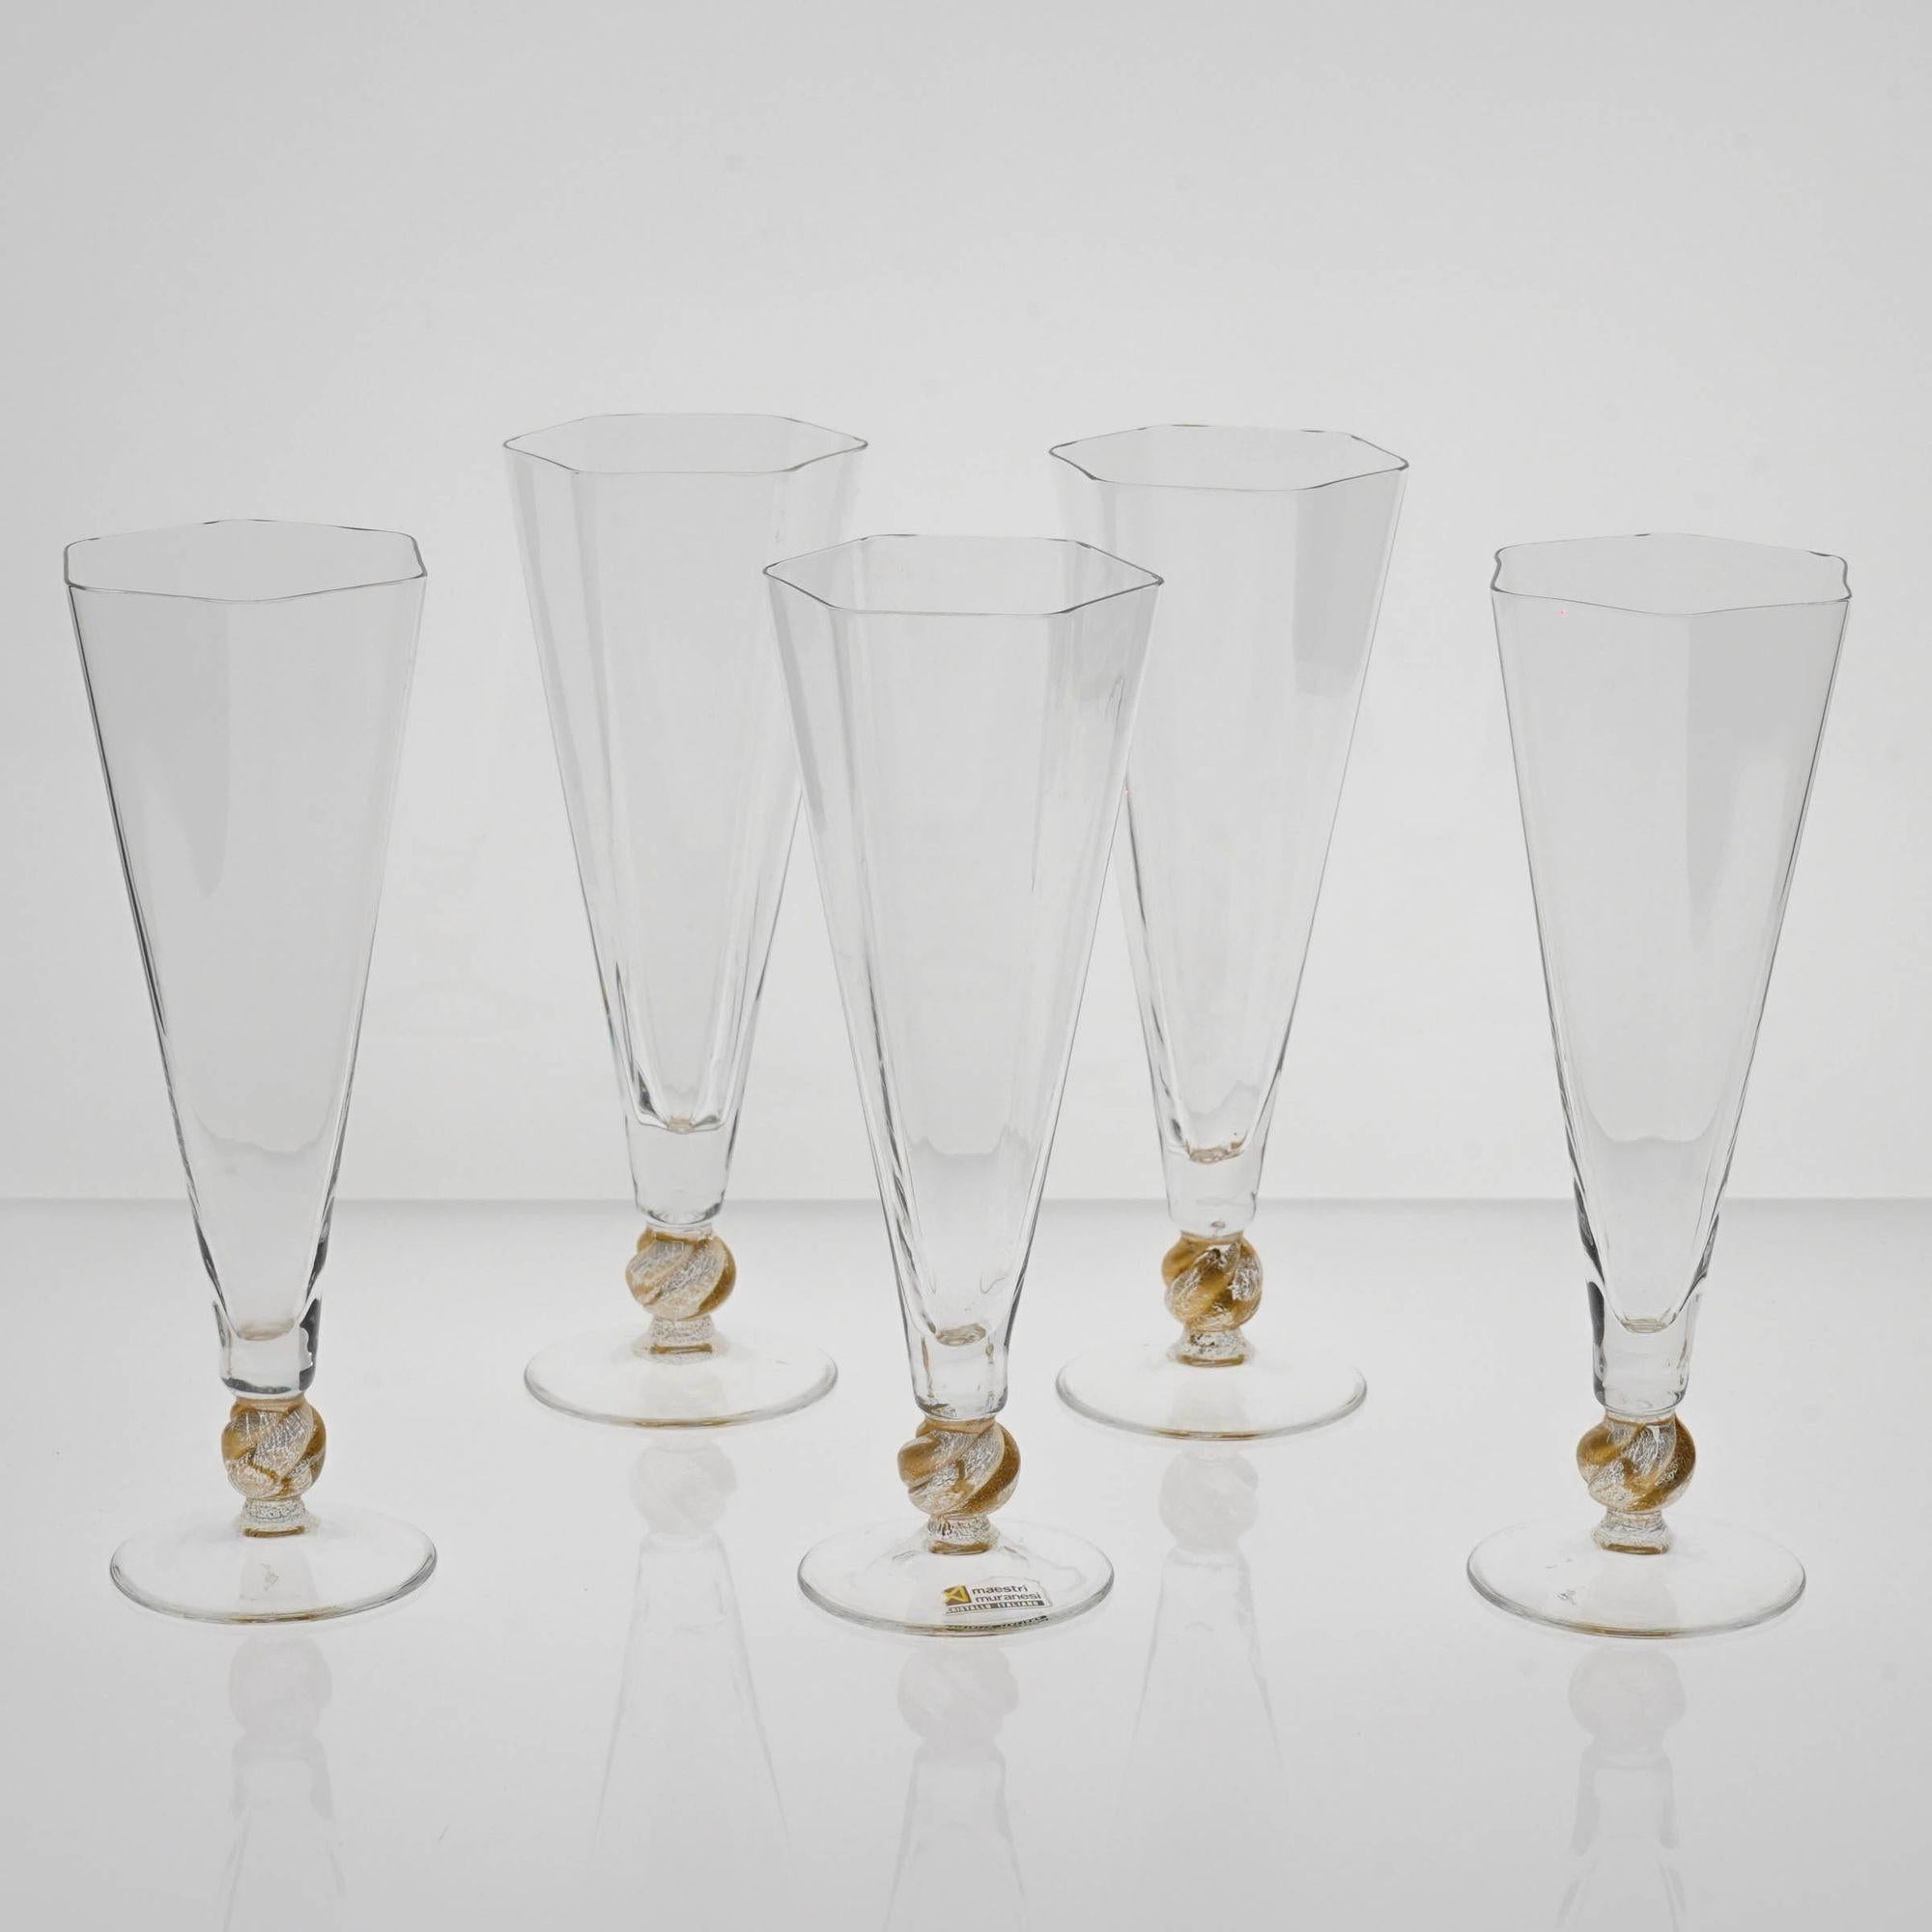 Set of 5 Cenedese Hexagonal Flutes, Gold Accent, Signed, Unique For Sale 9